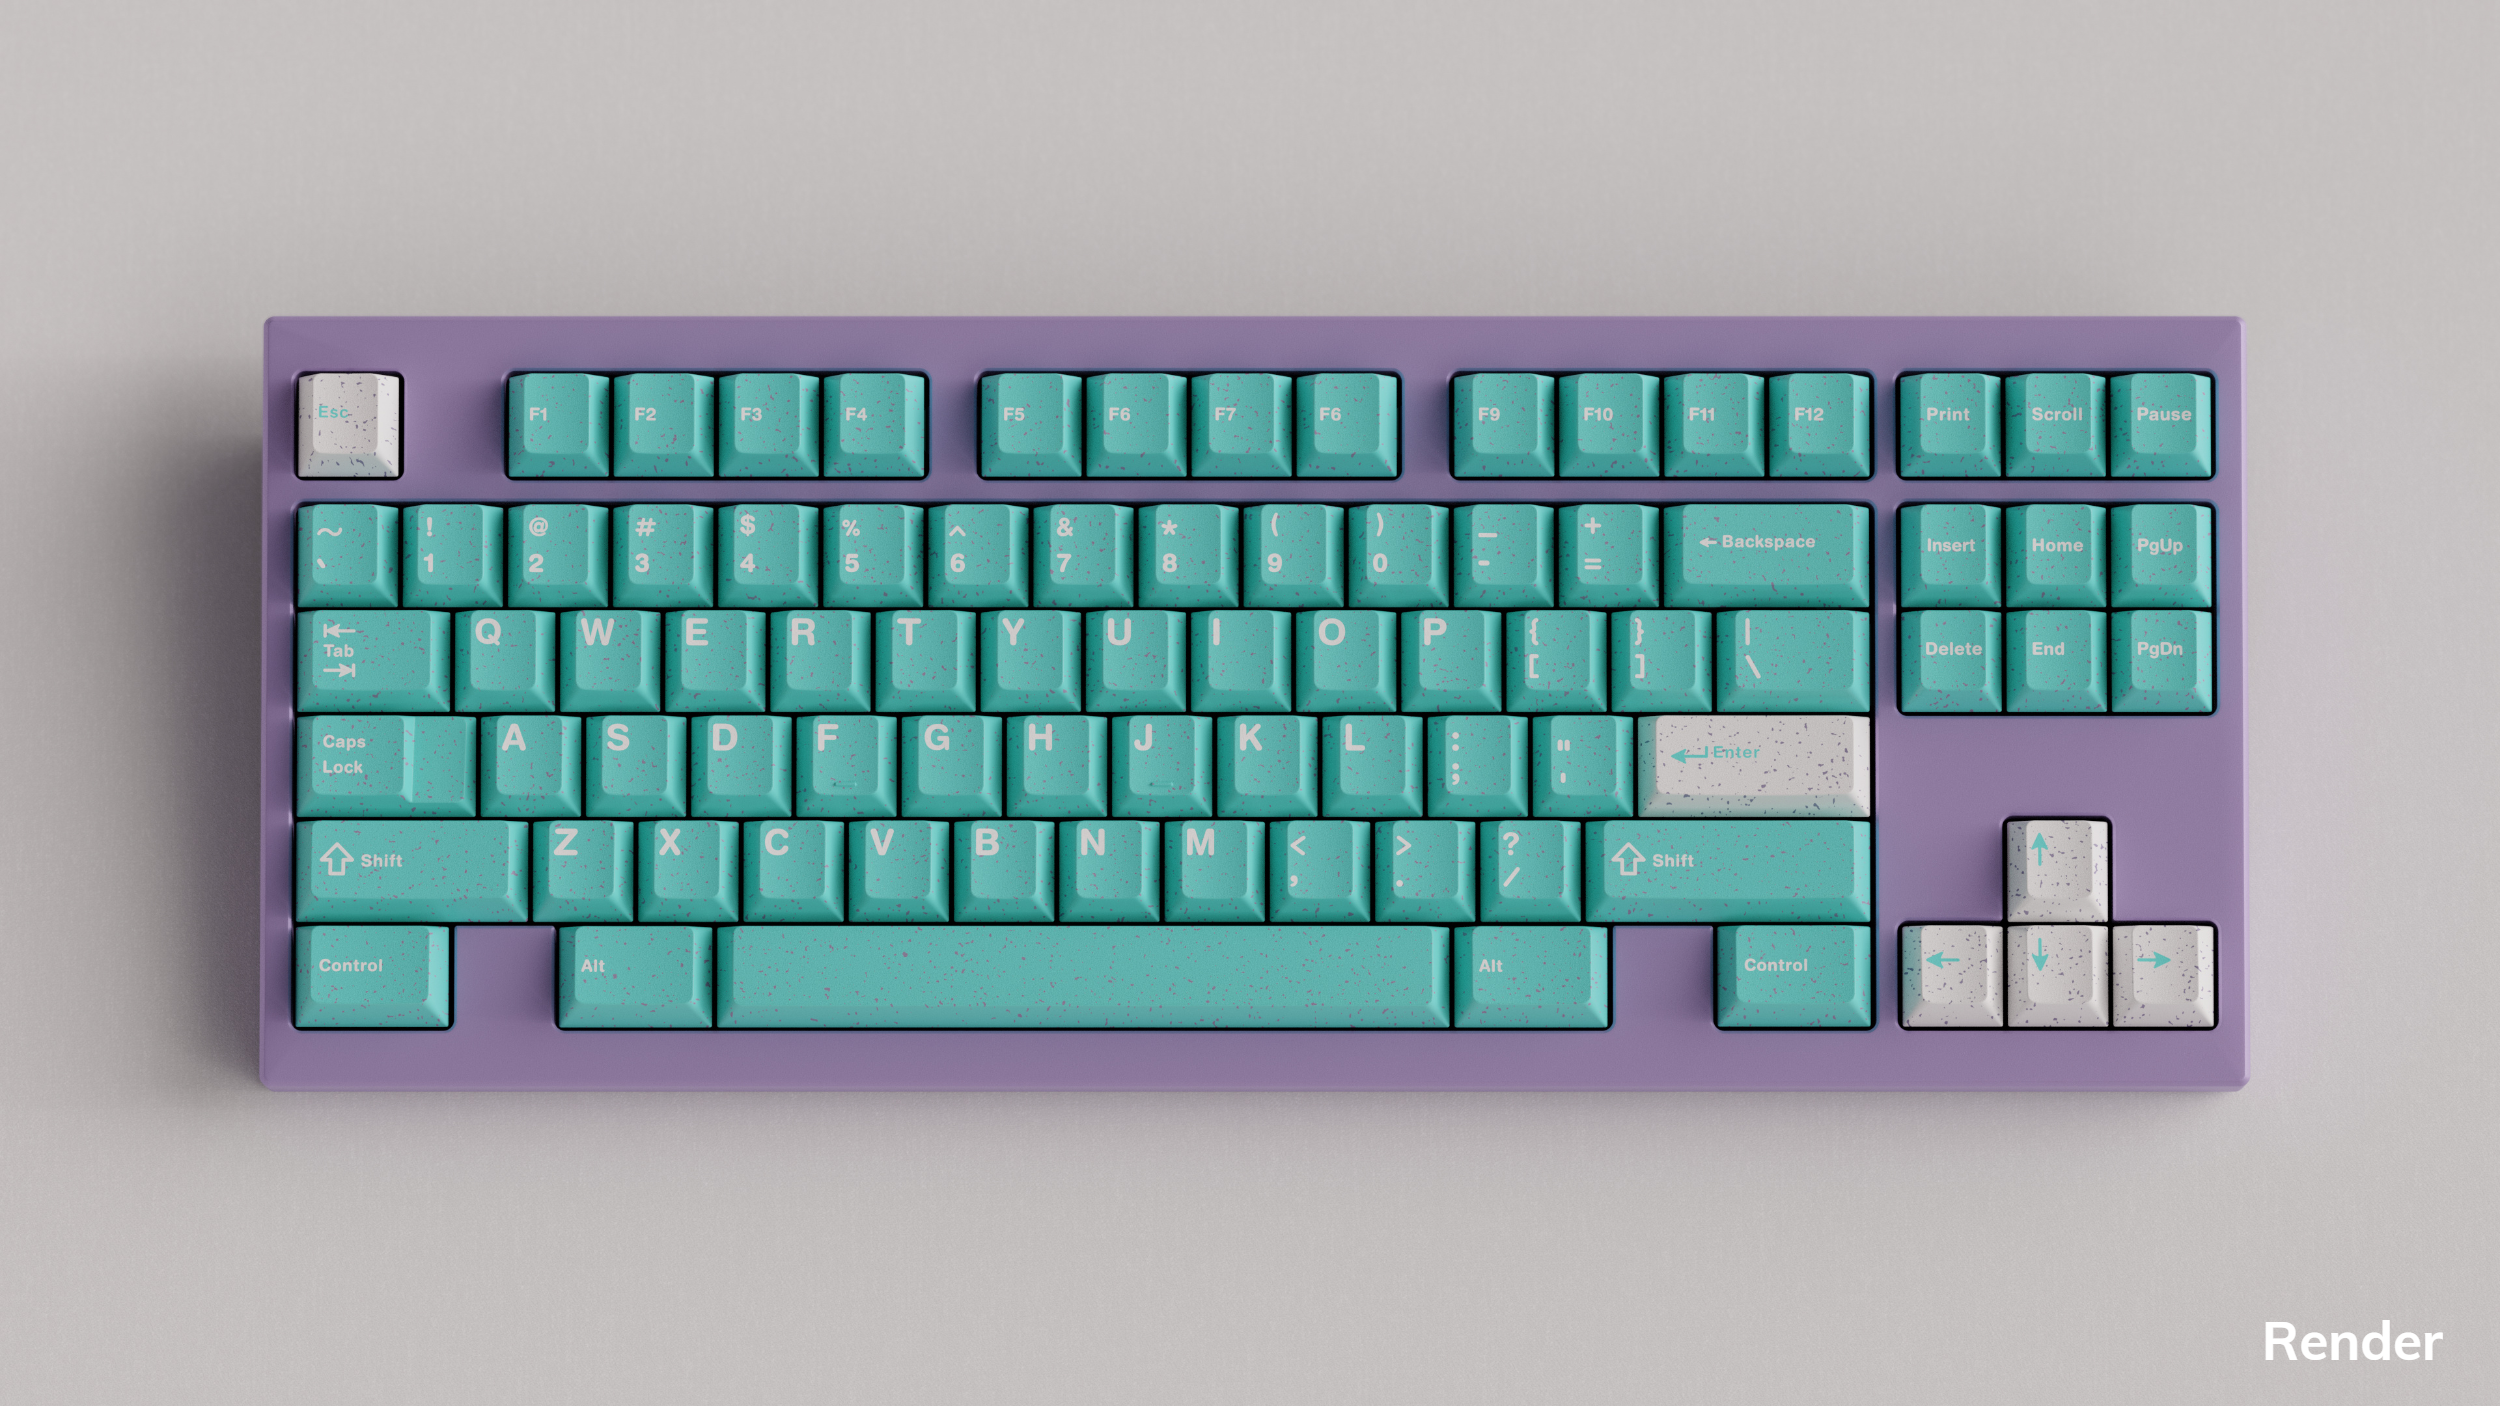 WS Purquoise Keycaps